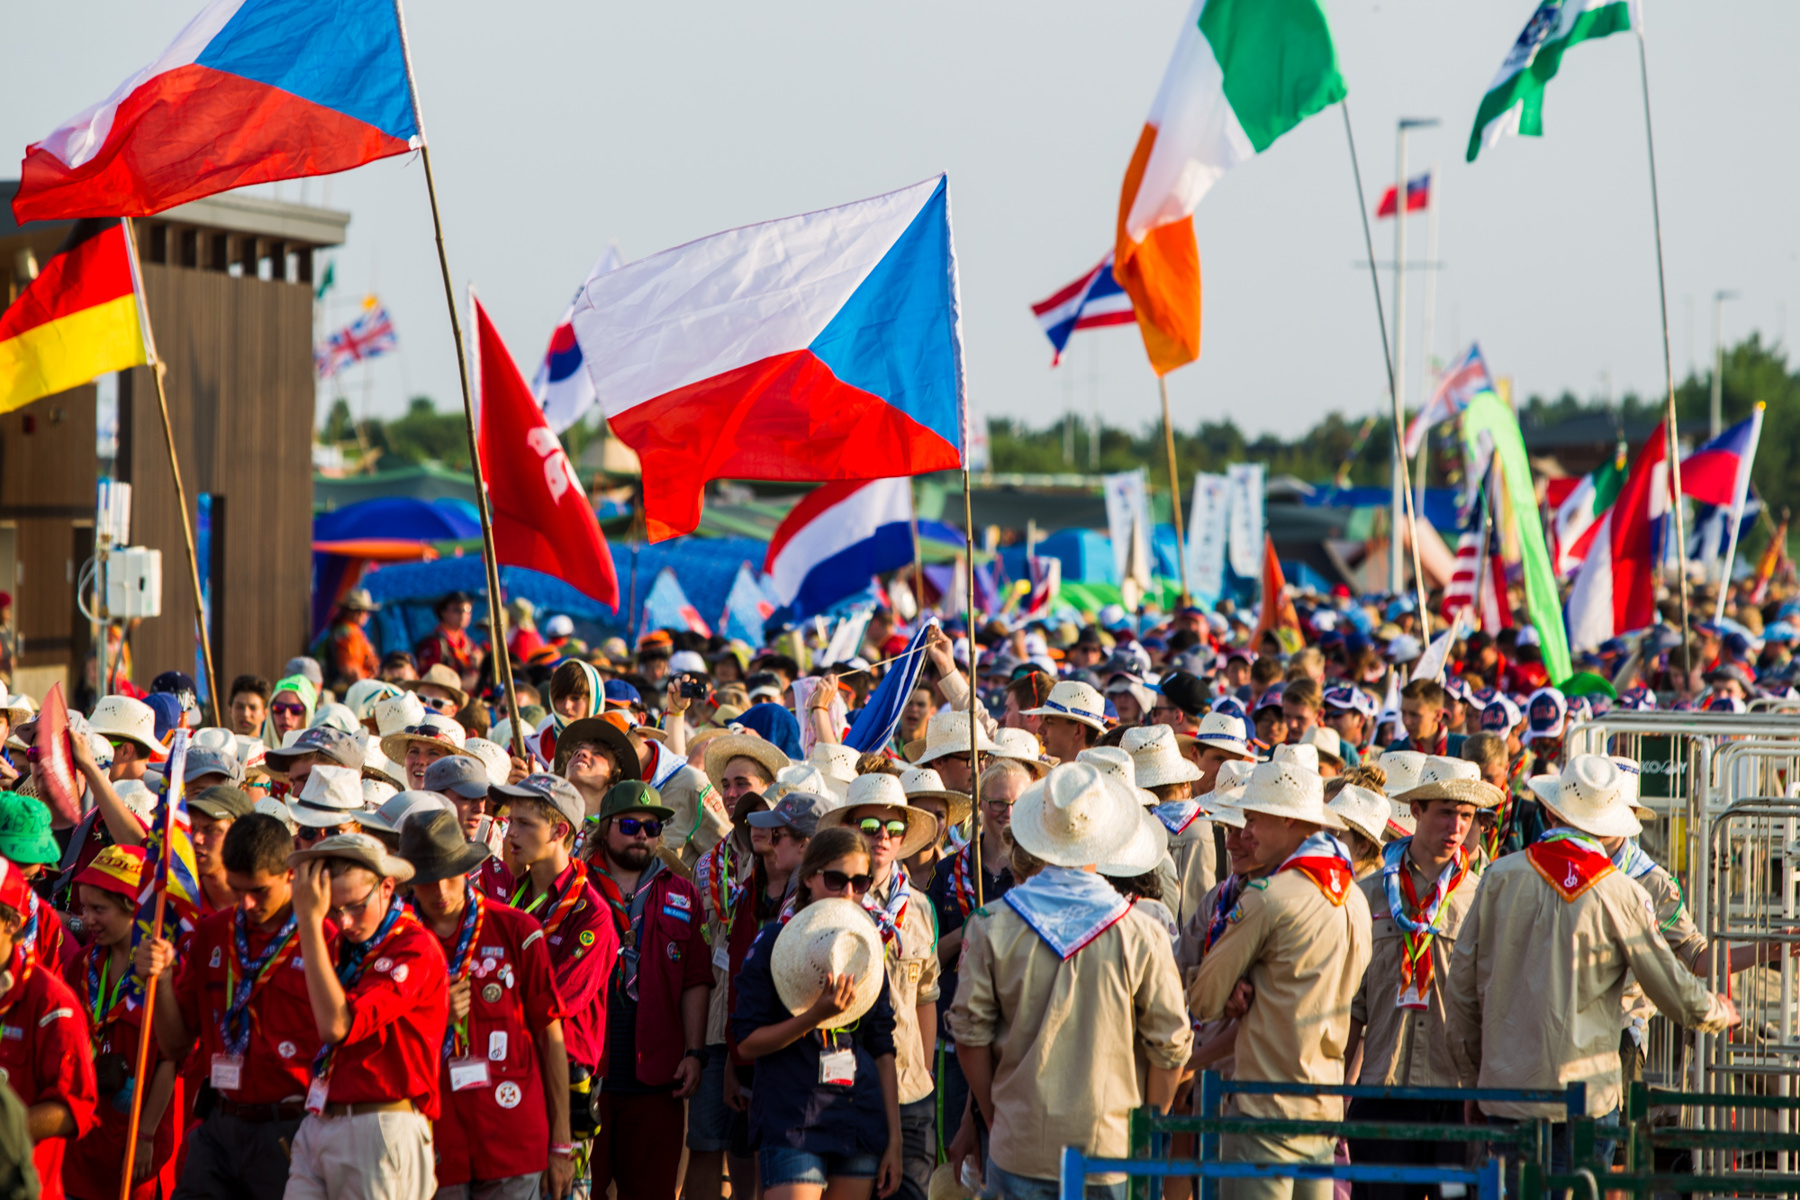 A crowd of scouts at the World Scout Jamboree holding flags on tall flagpoles